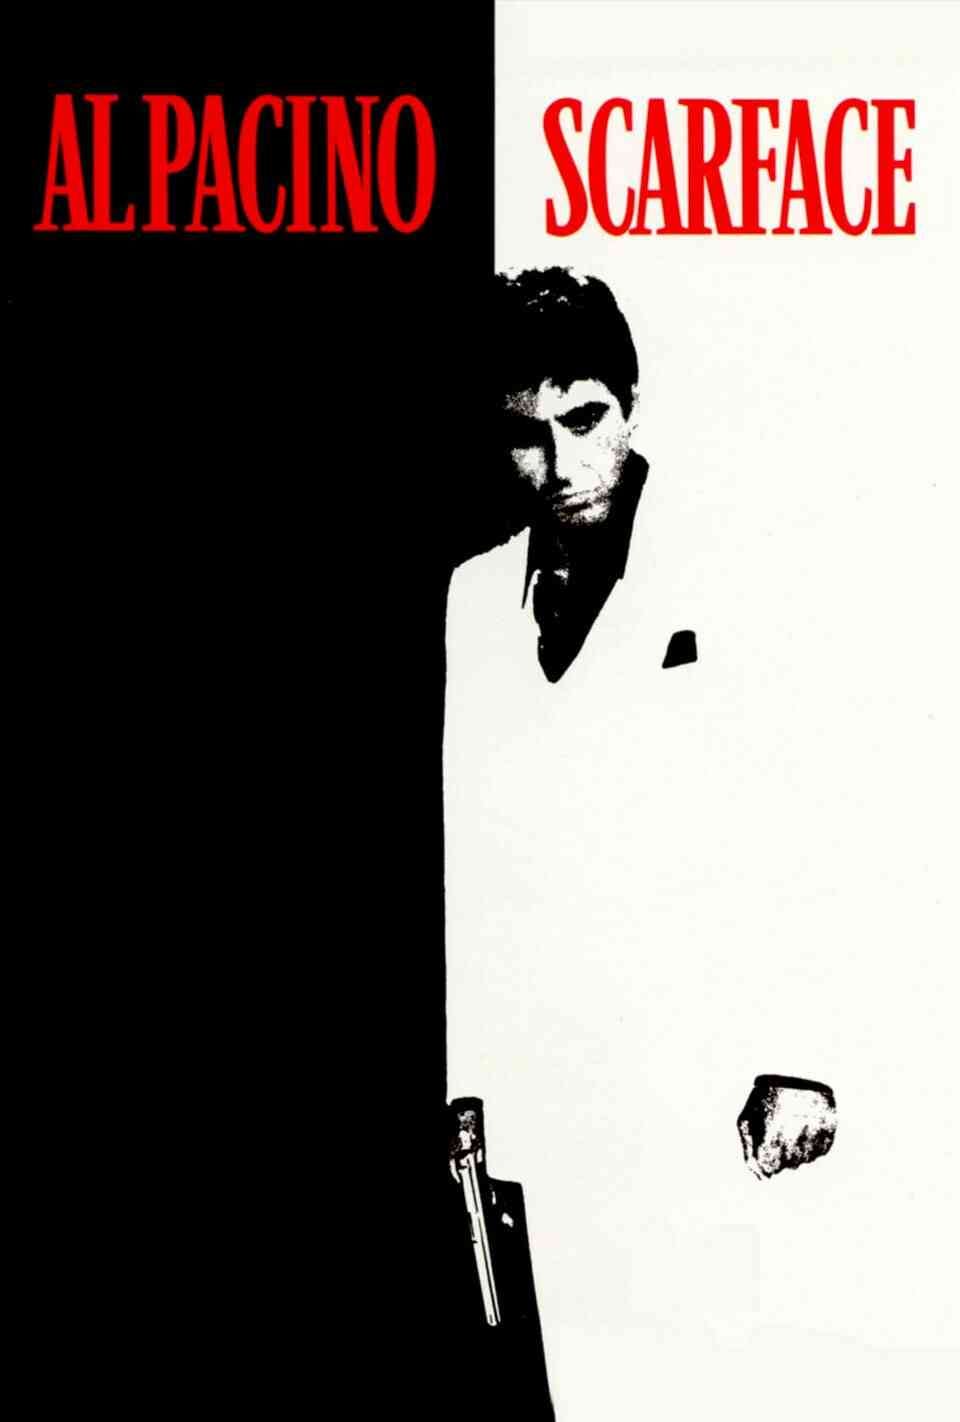 Read Scarface screenplay (poster)